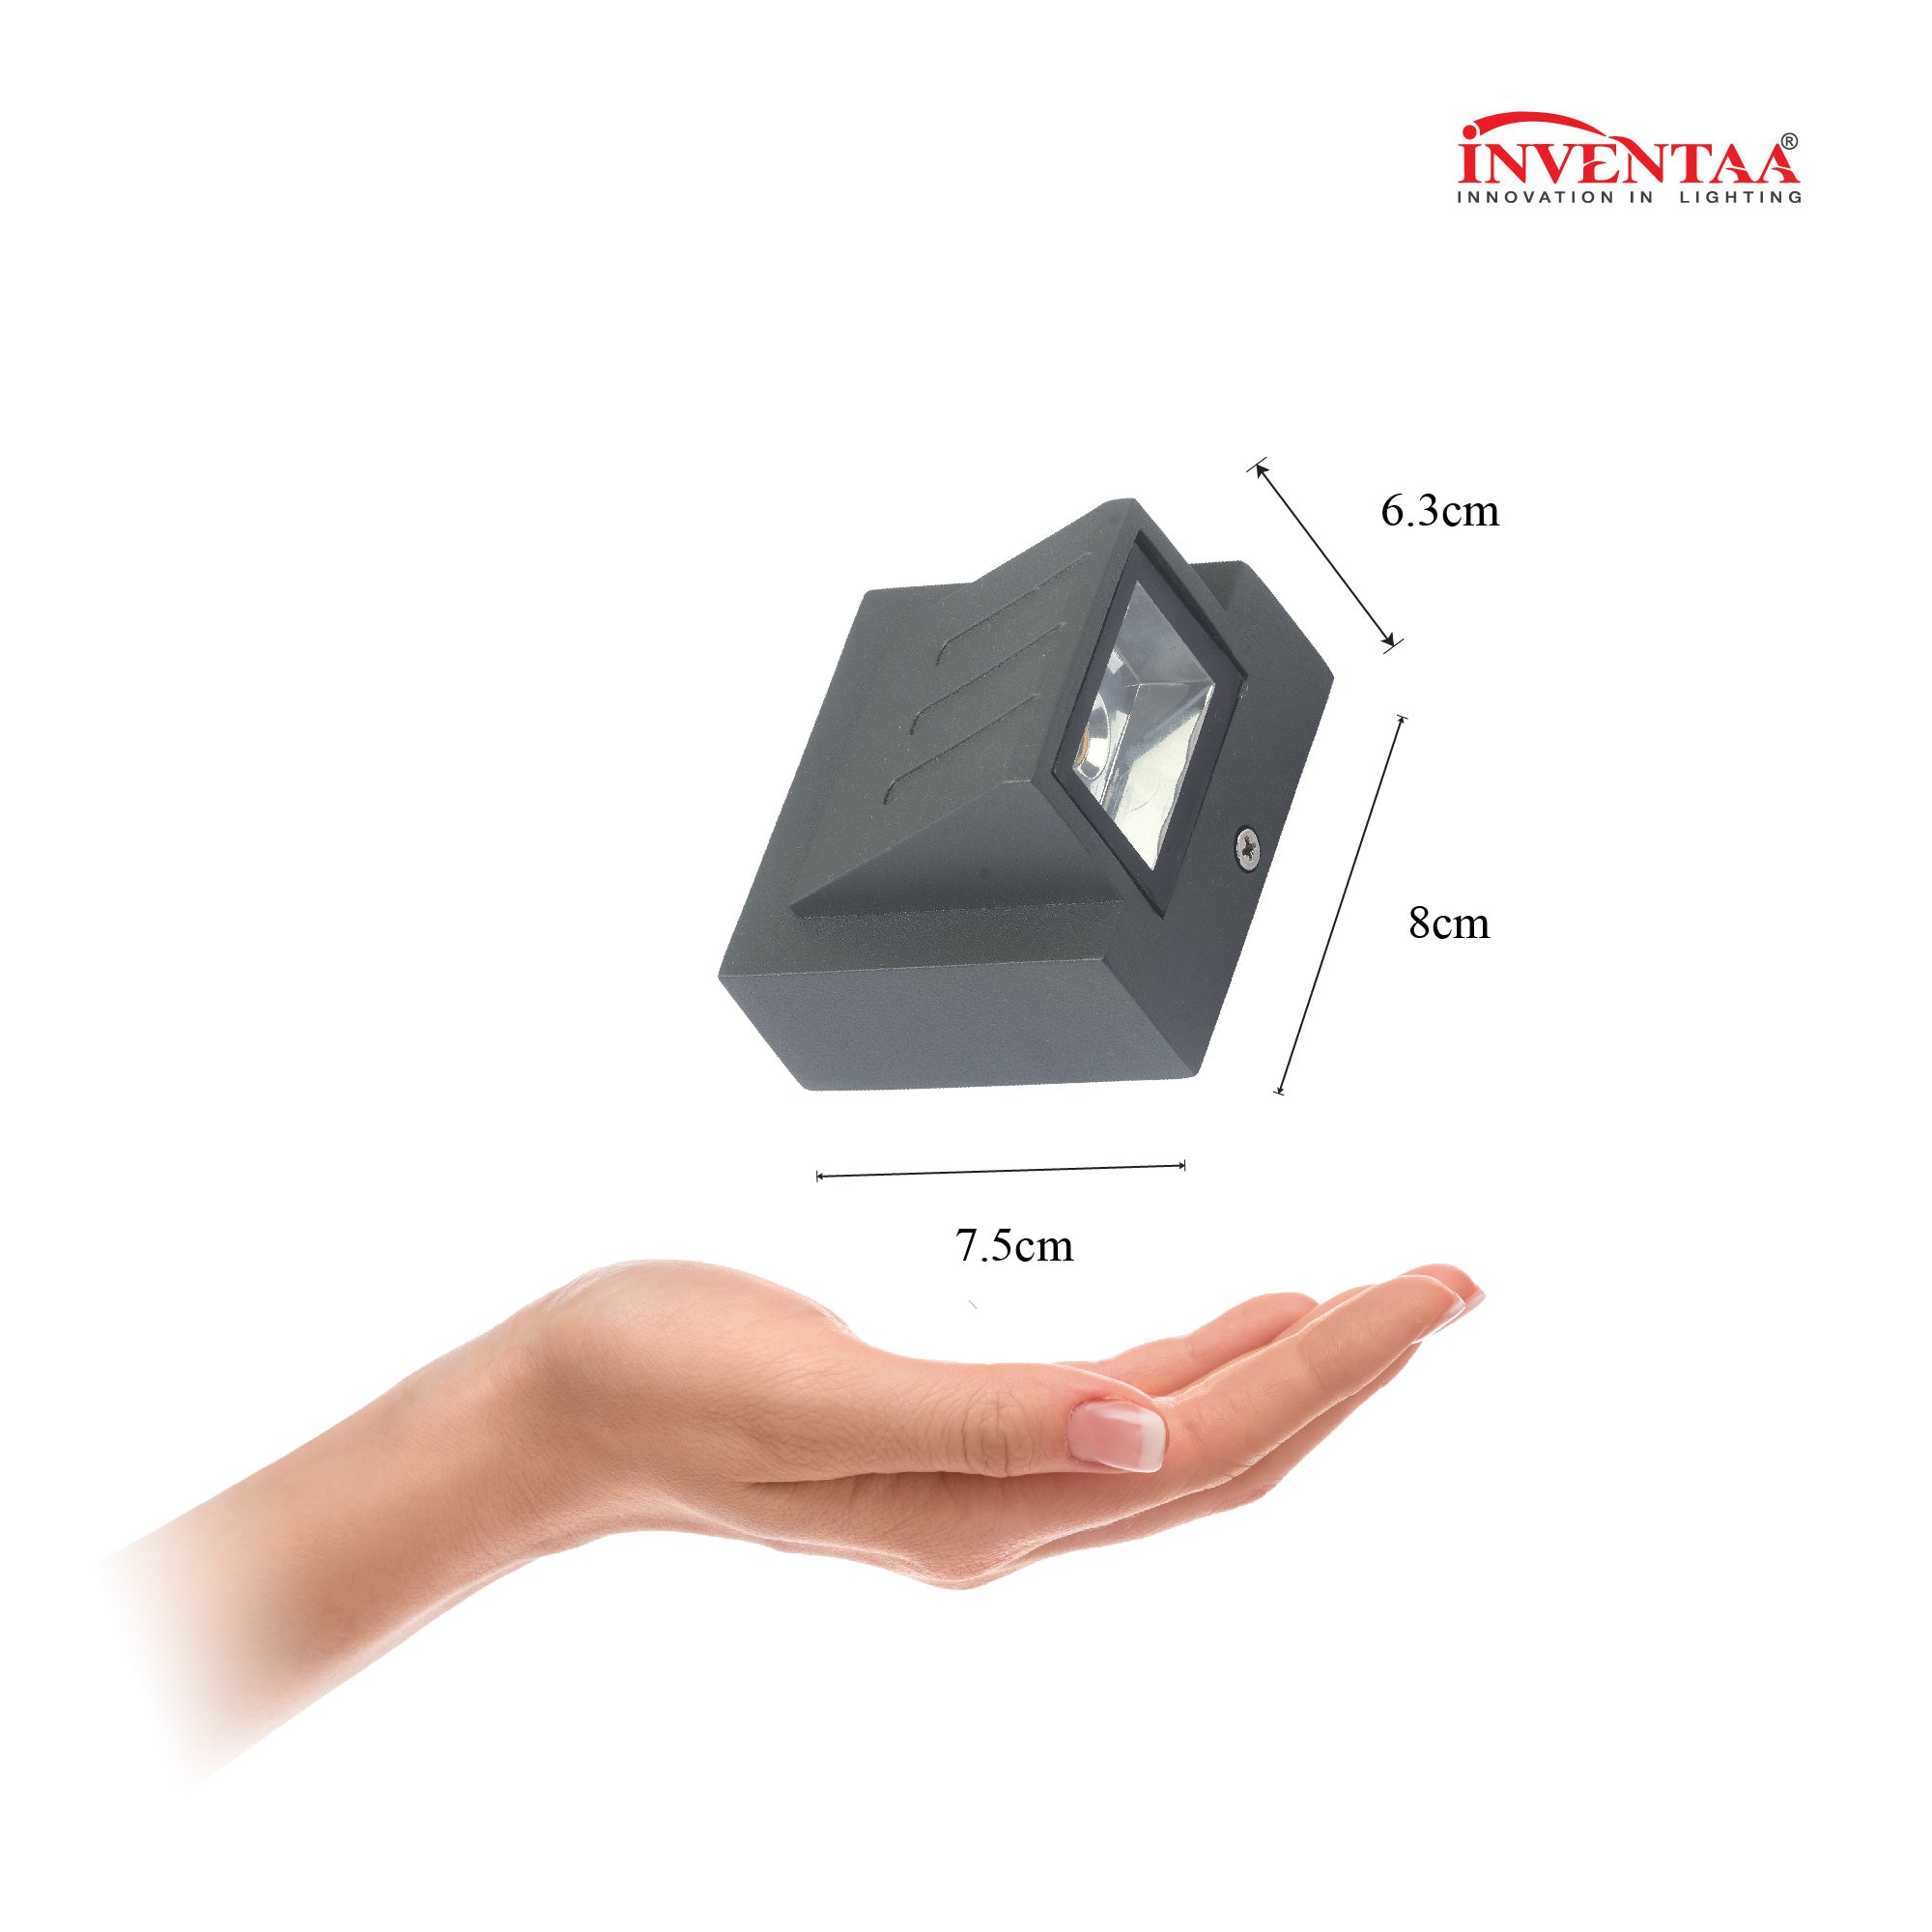 Dimension of Reina one way led wall light #type_1 way